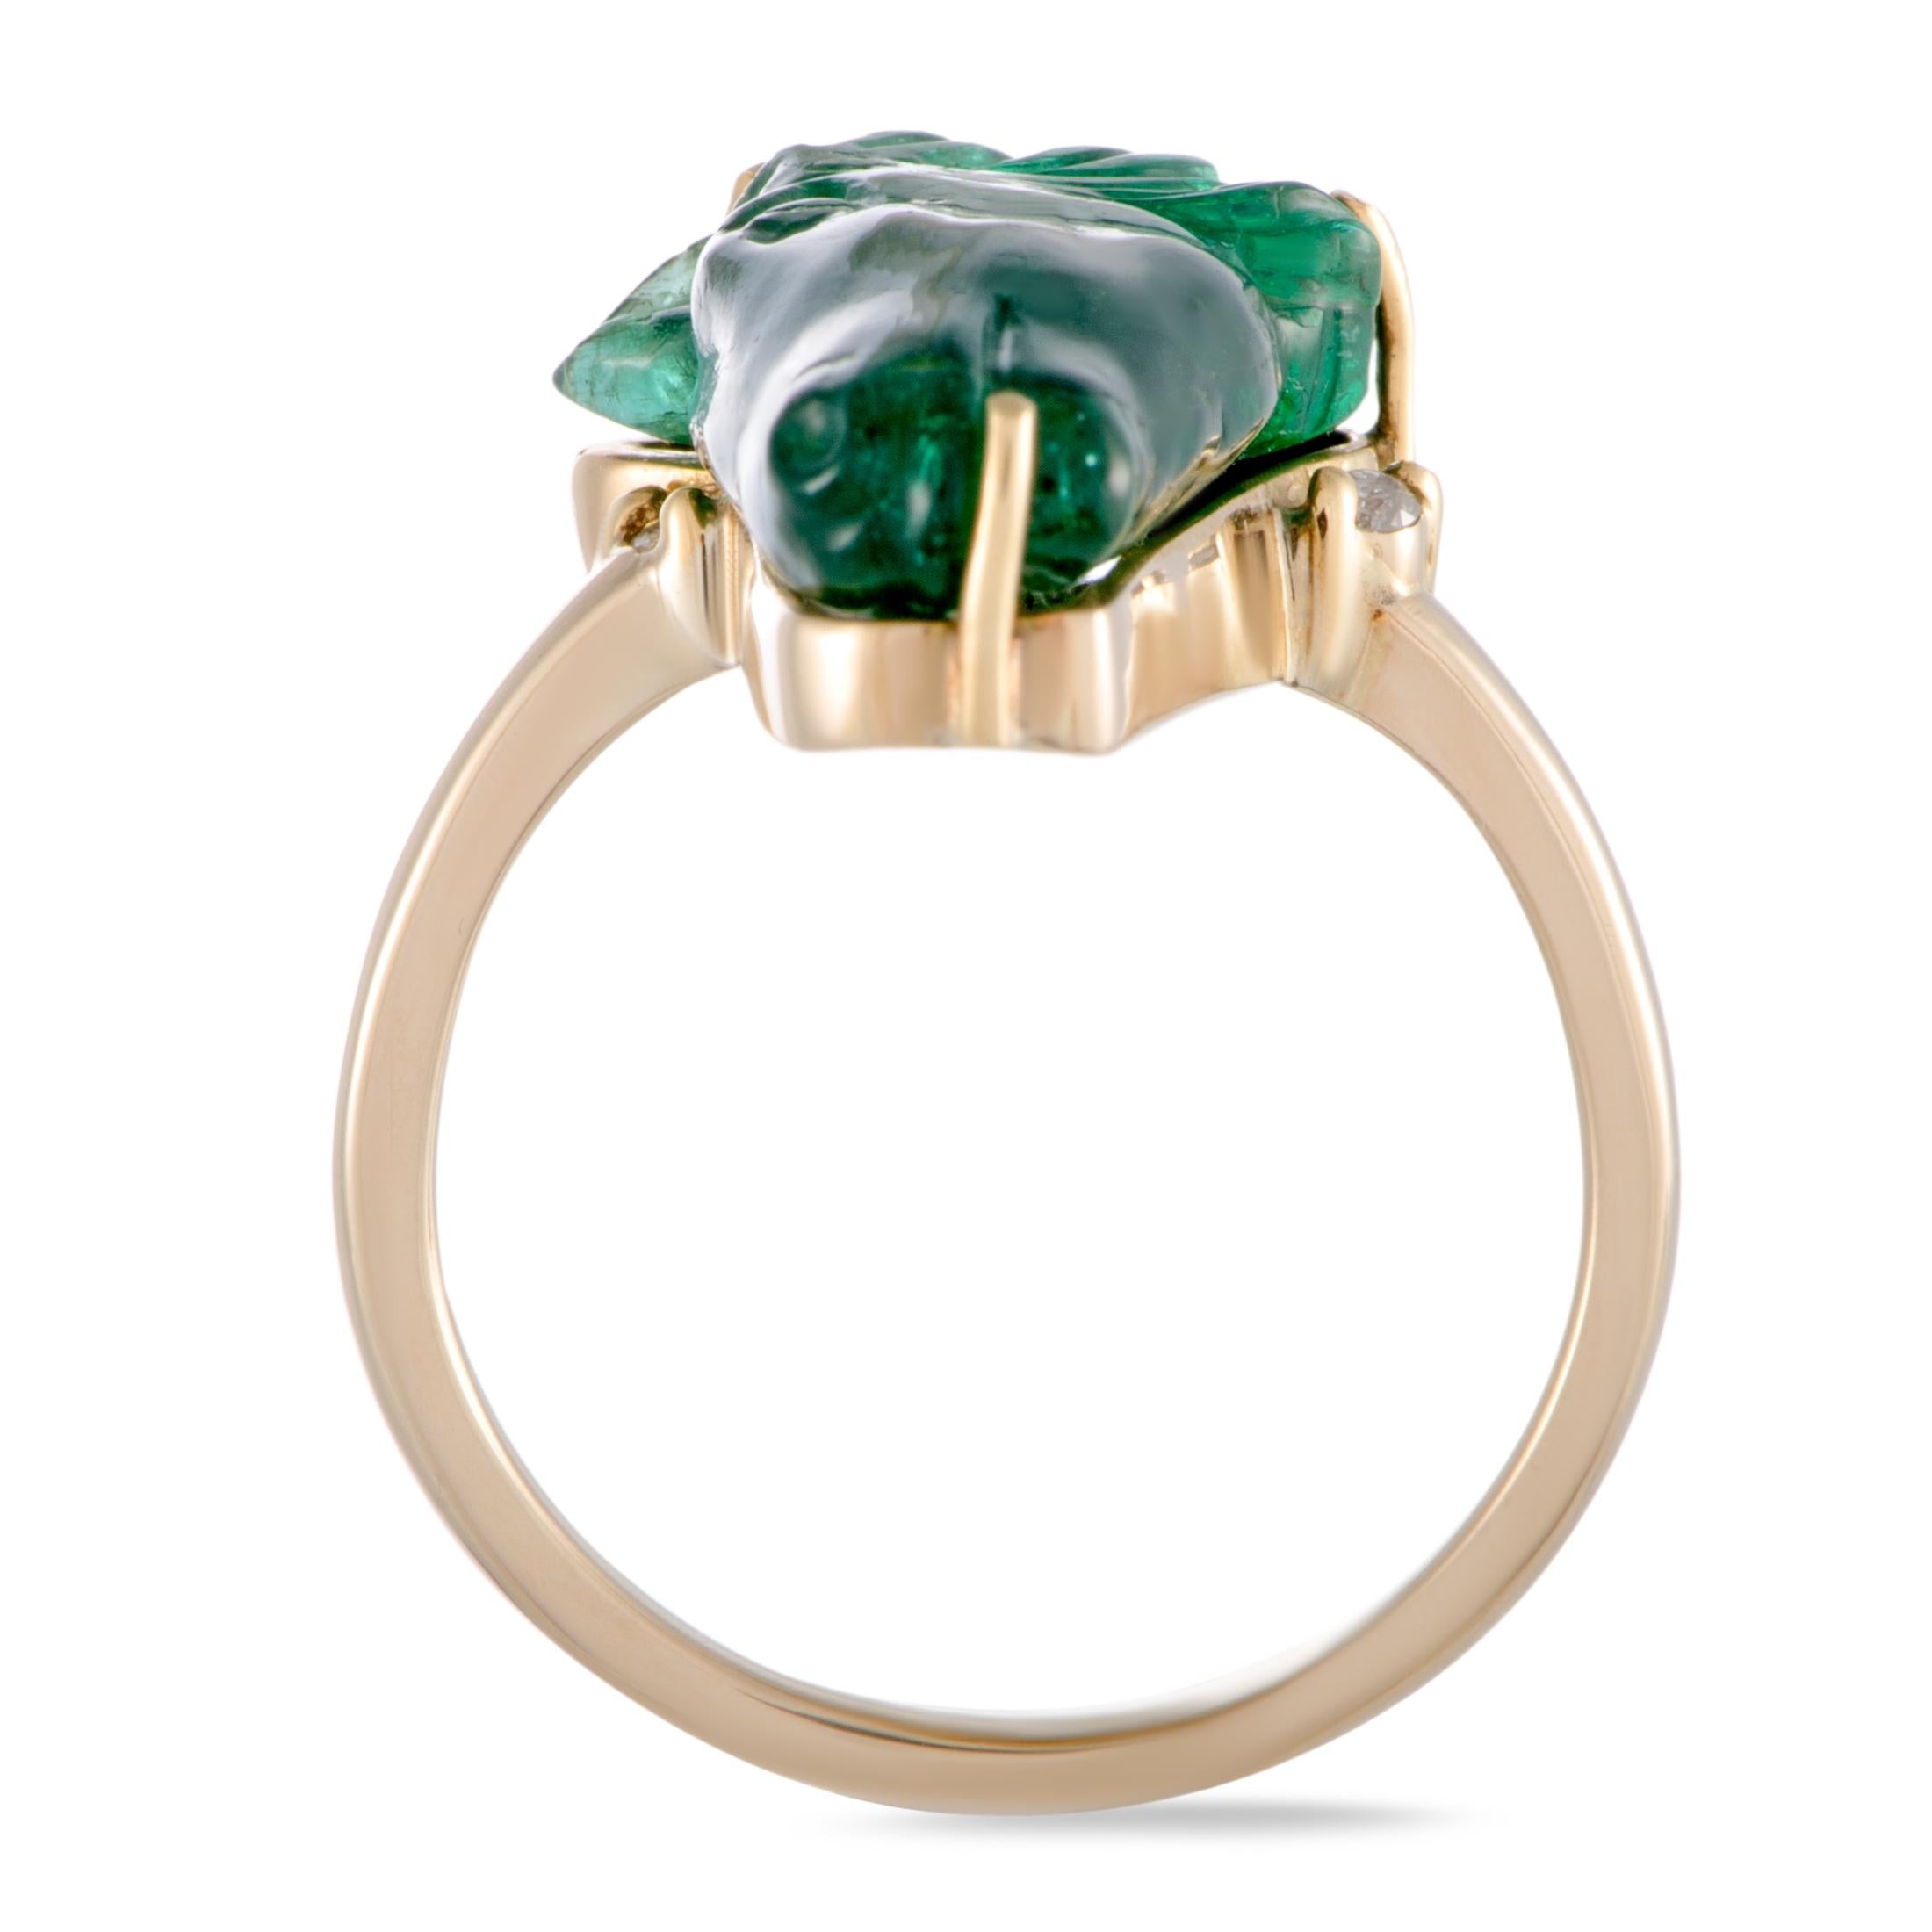 Boasting an exceptionally intriguing and highly unconventional motif for a tastefully bold appeal, this fantastic 18K yellow gold ring is neatly set with a magnificent emerald weighing 7.25 carats in the form of a graceful horse’s head while an